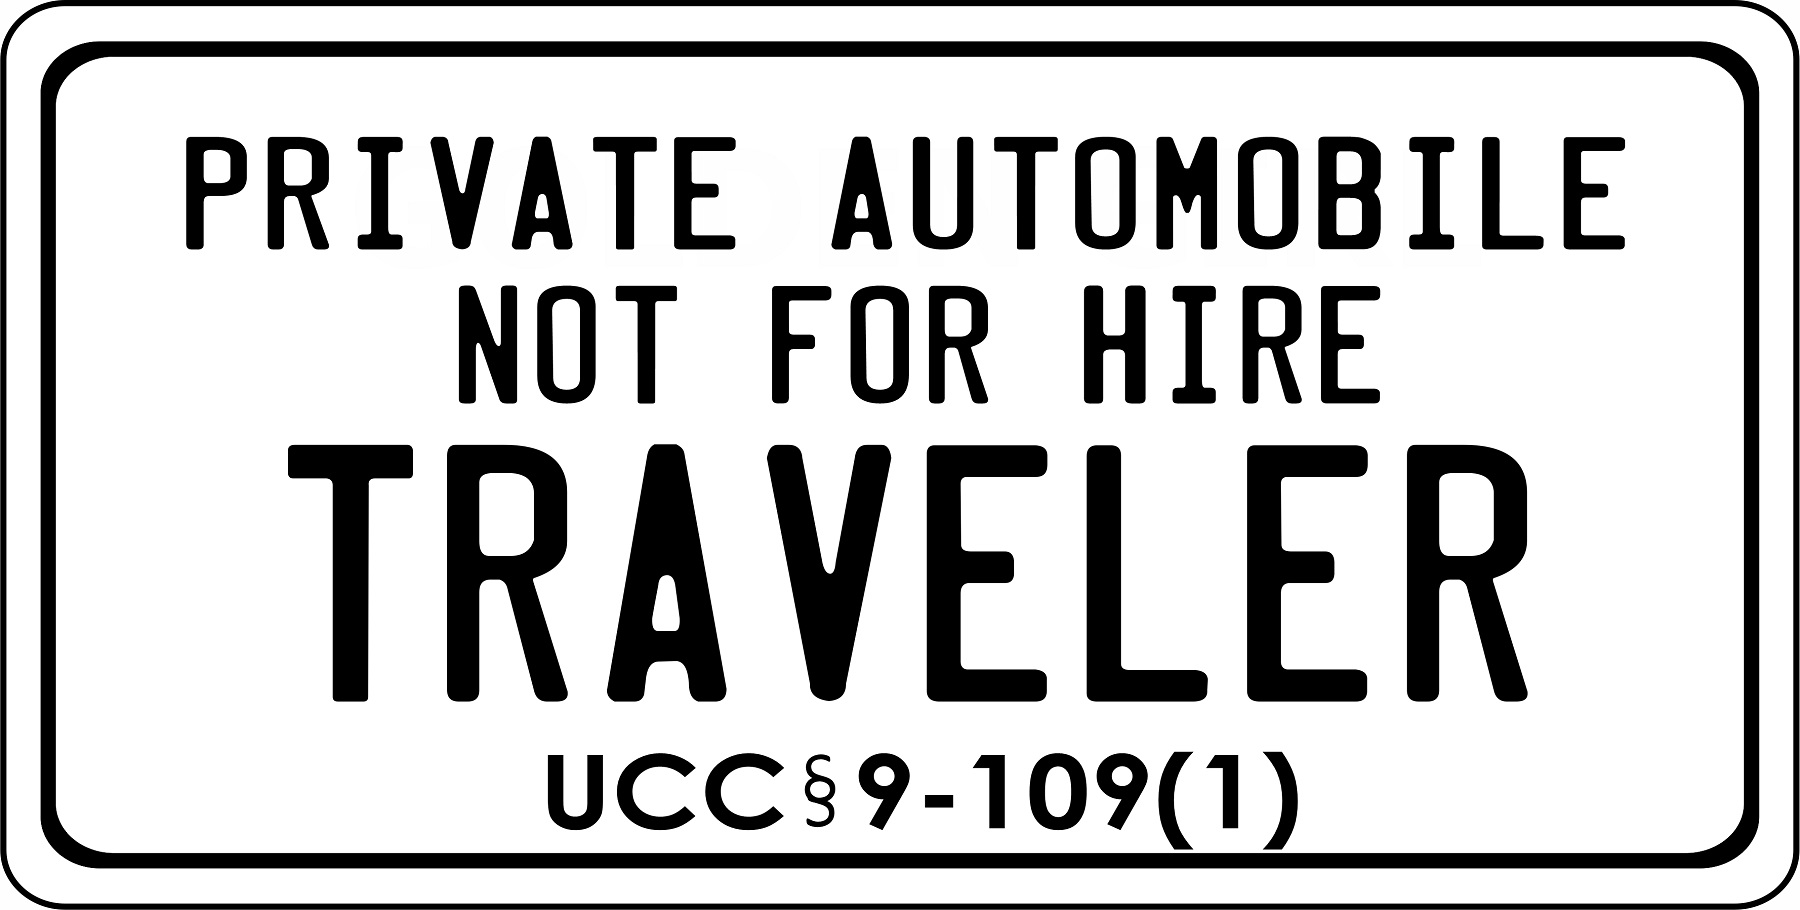 License Plates Online Not For Hire Traveler White Photo License Plate